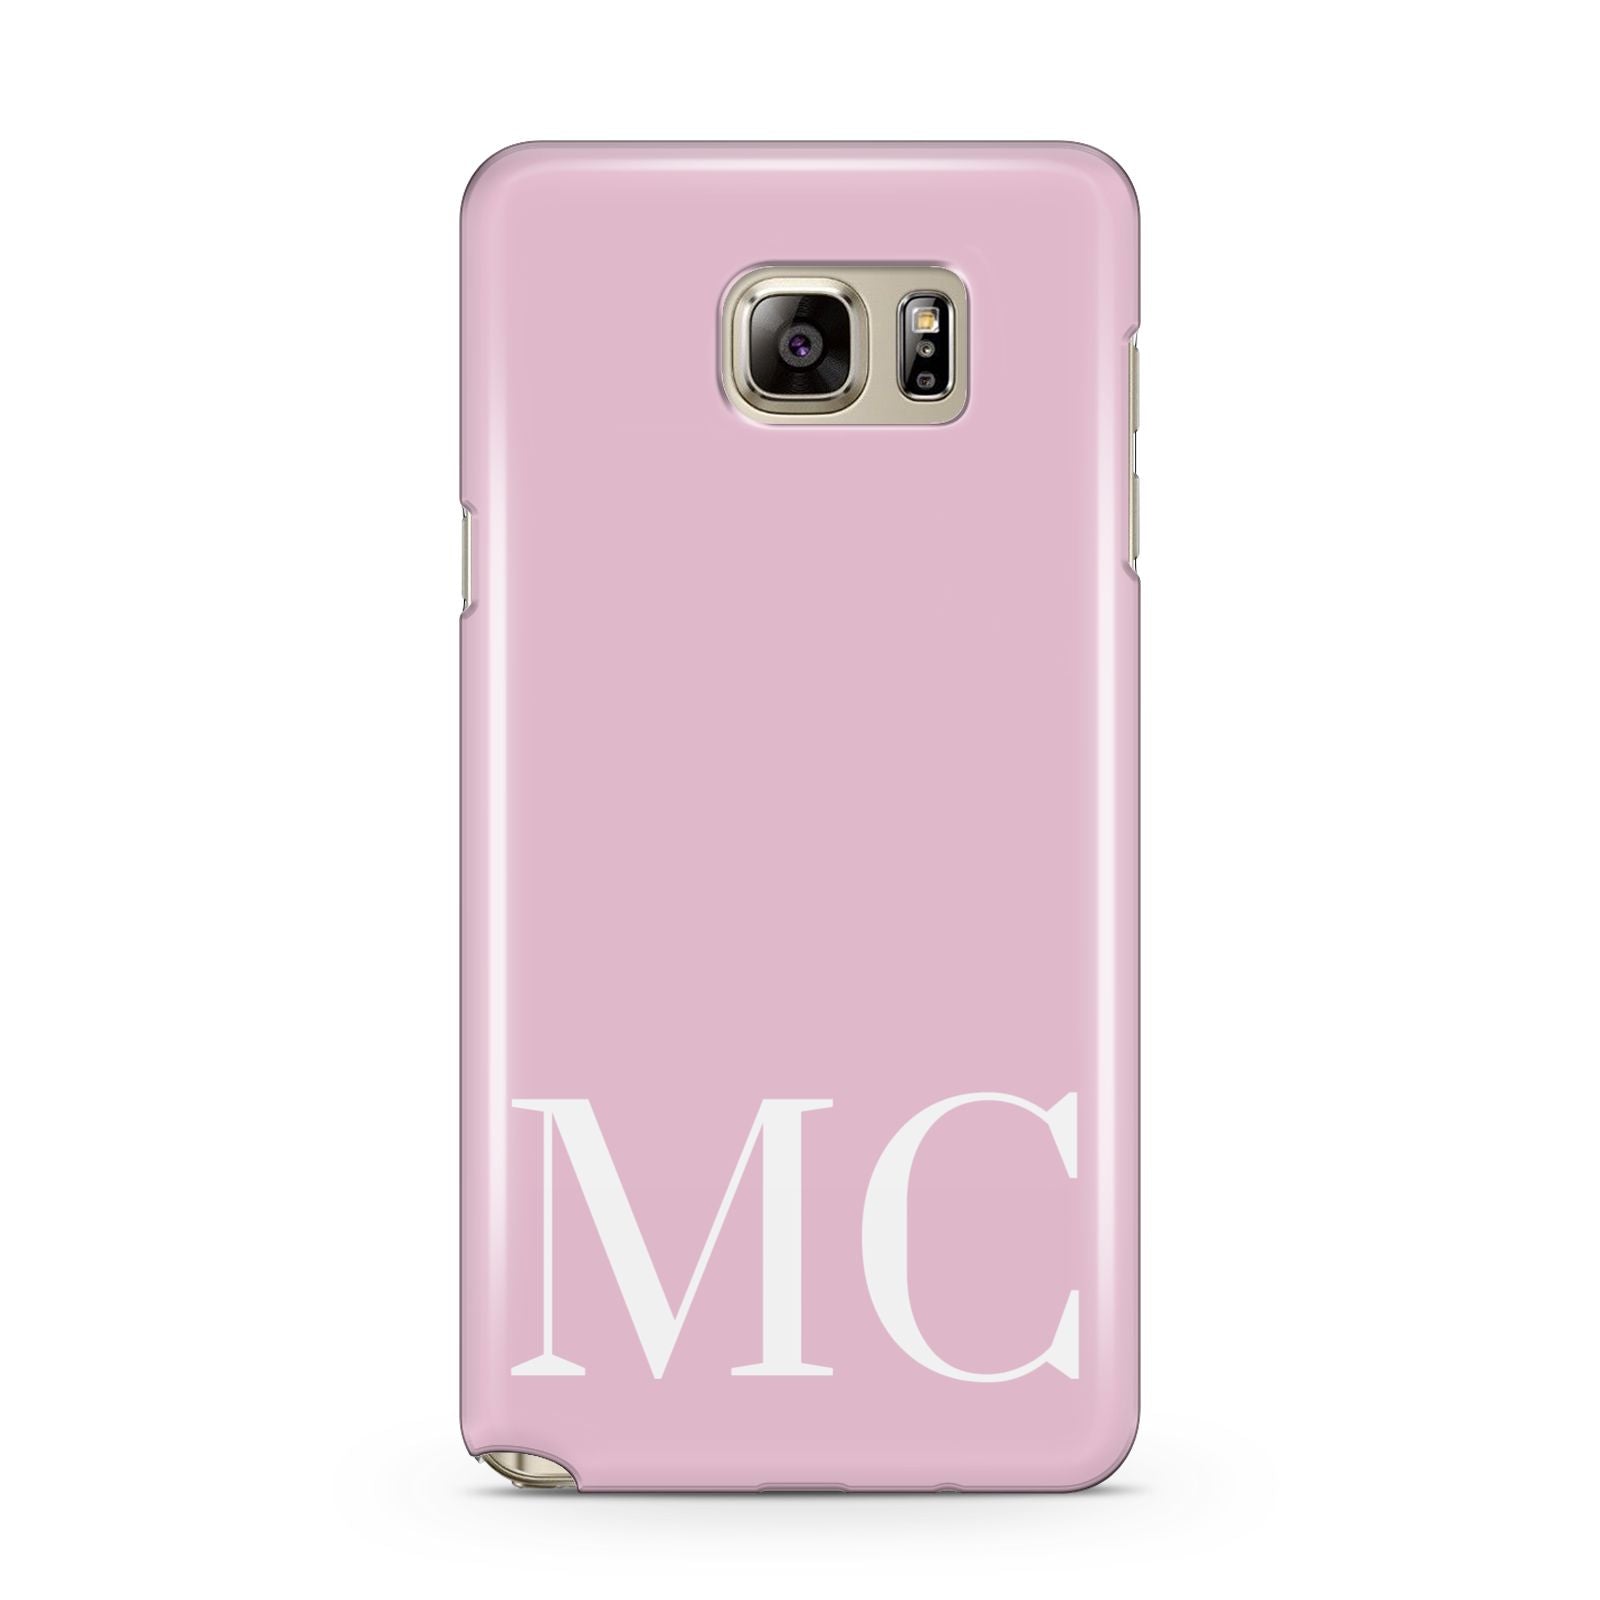 Initials Personalised 2 Samsung Galaxy Note 5 Case